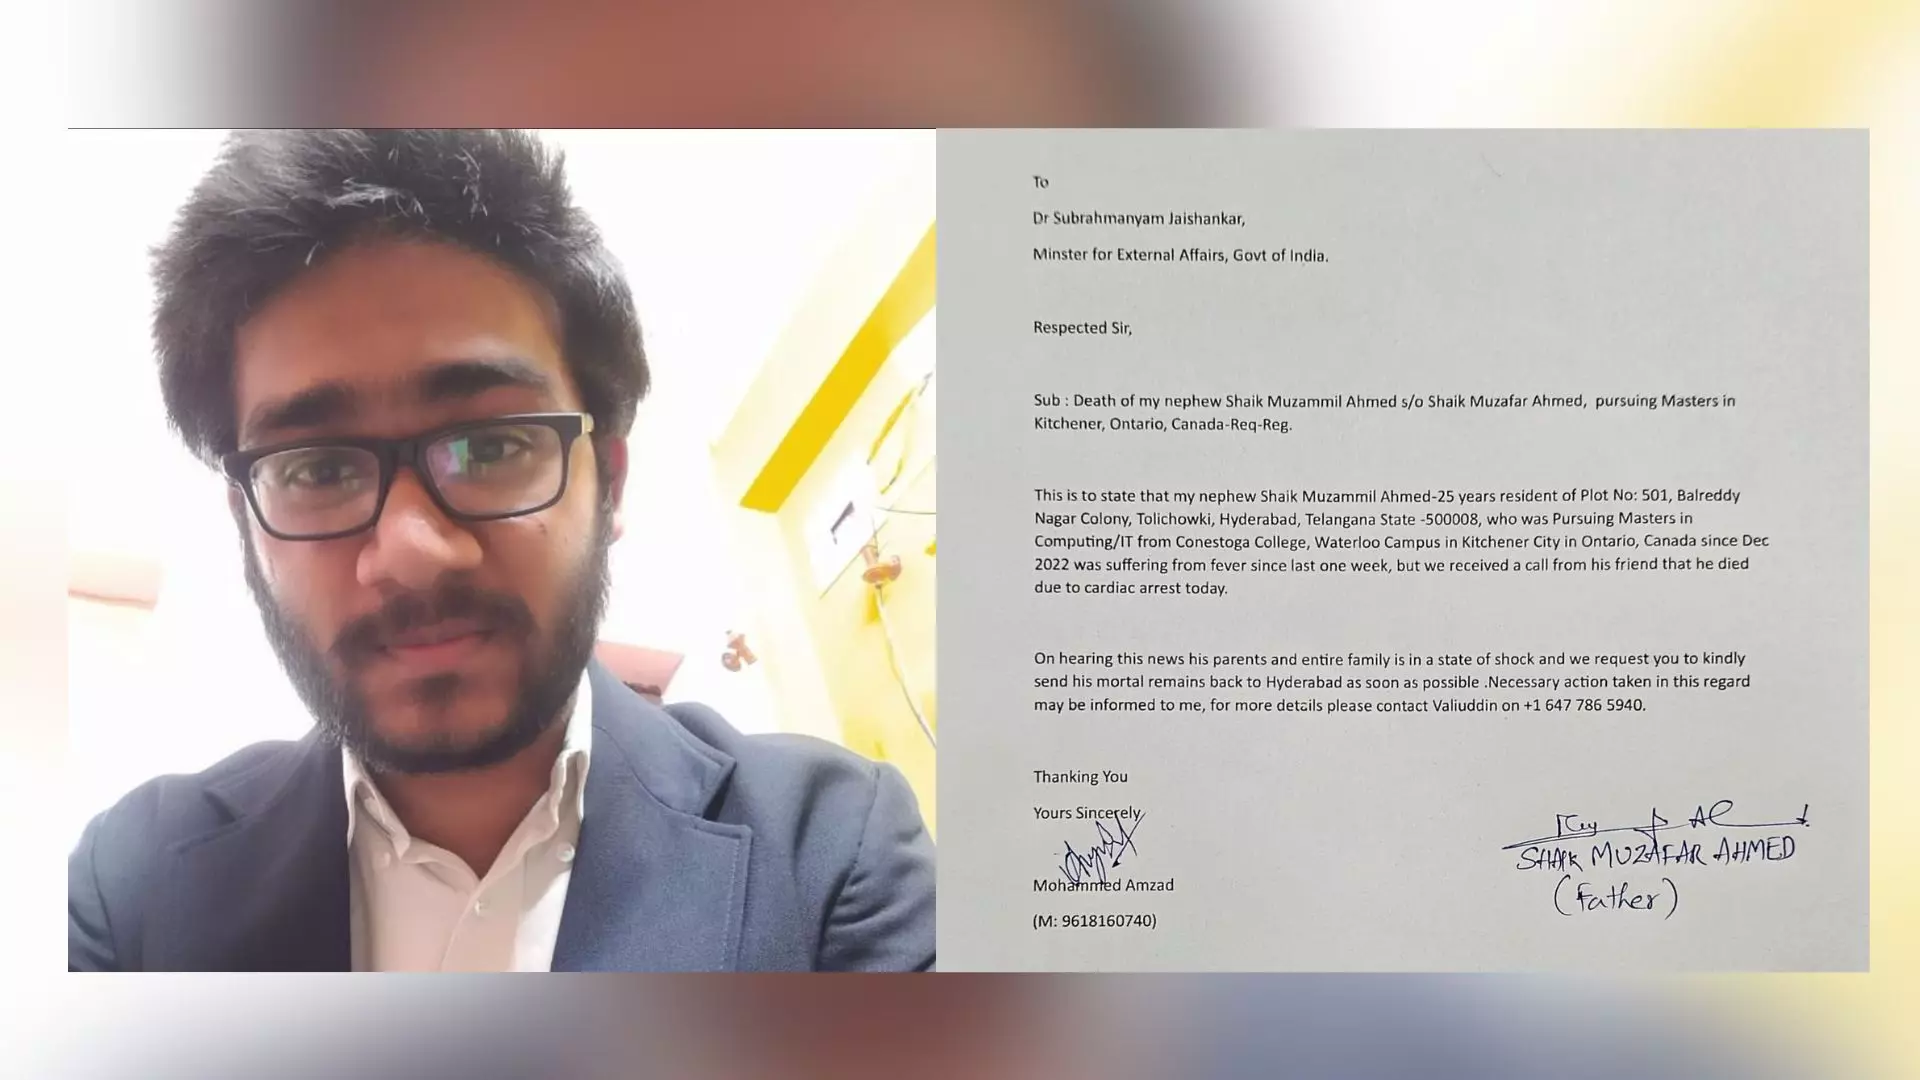 Indian Student Fatally Shot Dead in Vancouver, Family Seeks Assistance for Repatriation